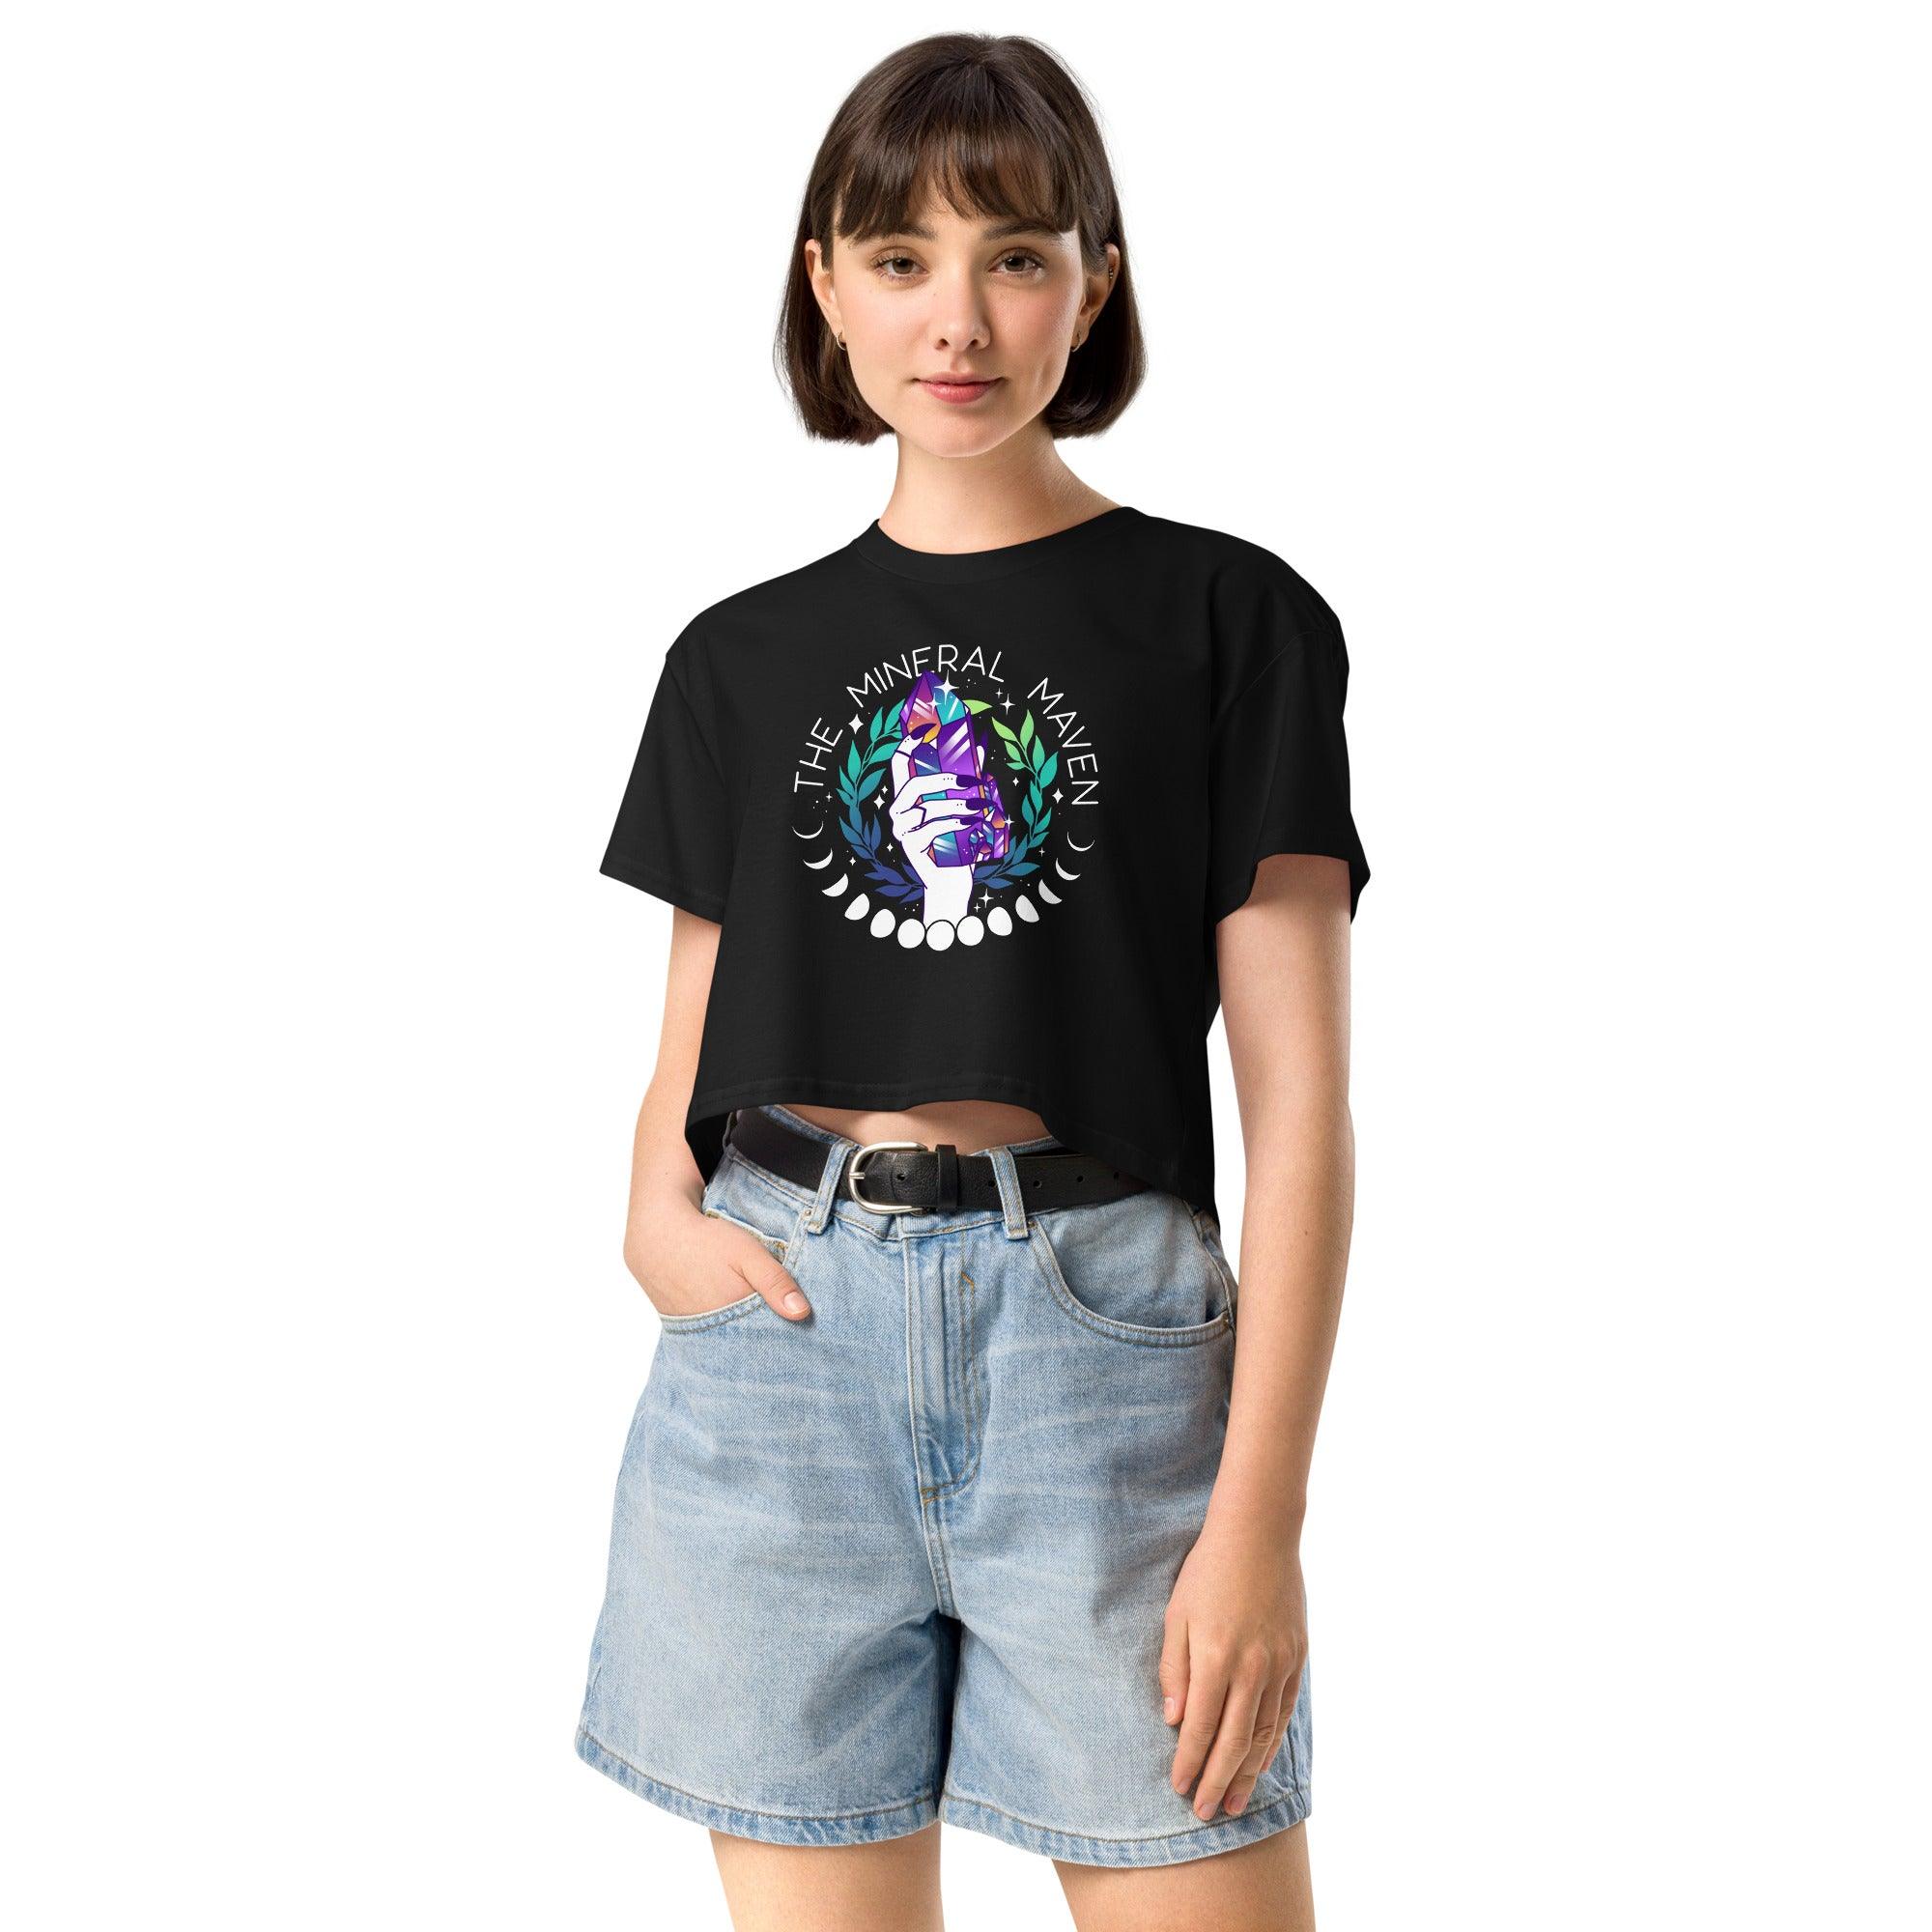 MM LOGO - CROP TOP - apparel, crop top, cropped tee, spring collection, tee - The Mineral Maven